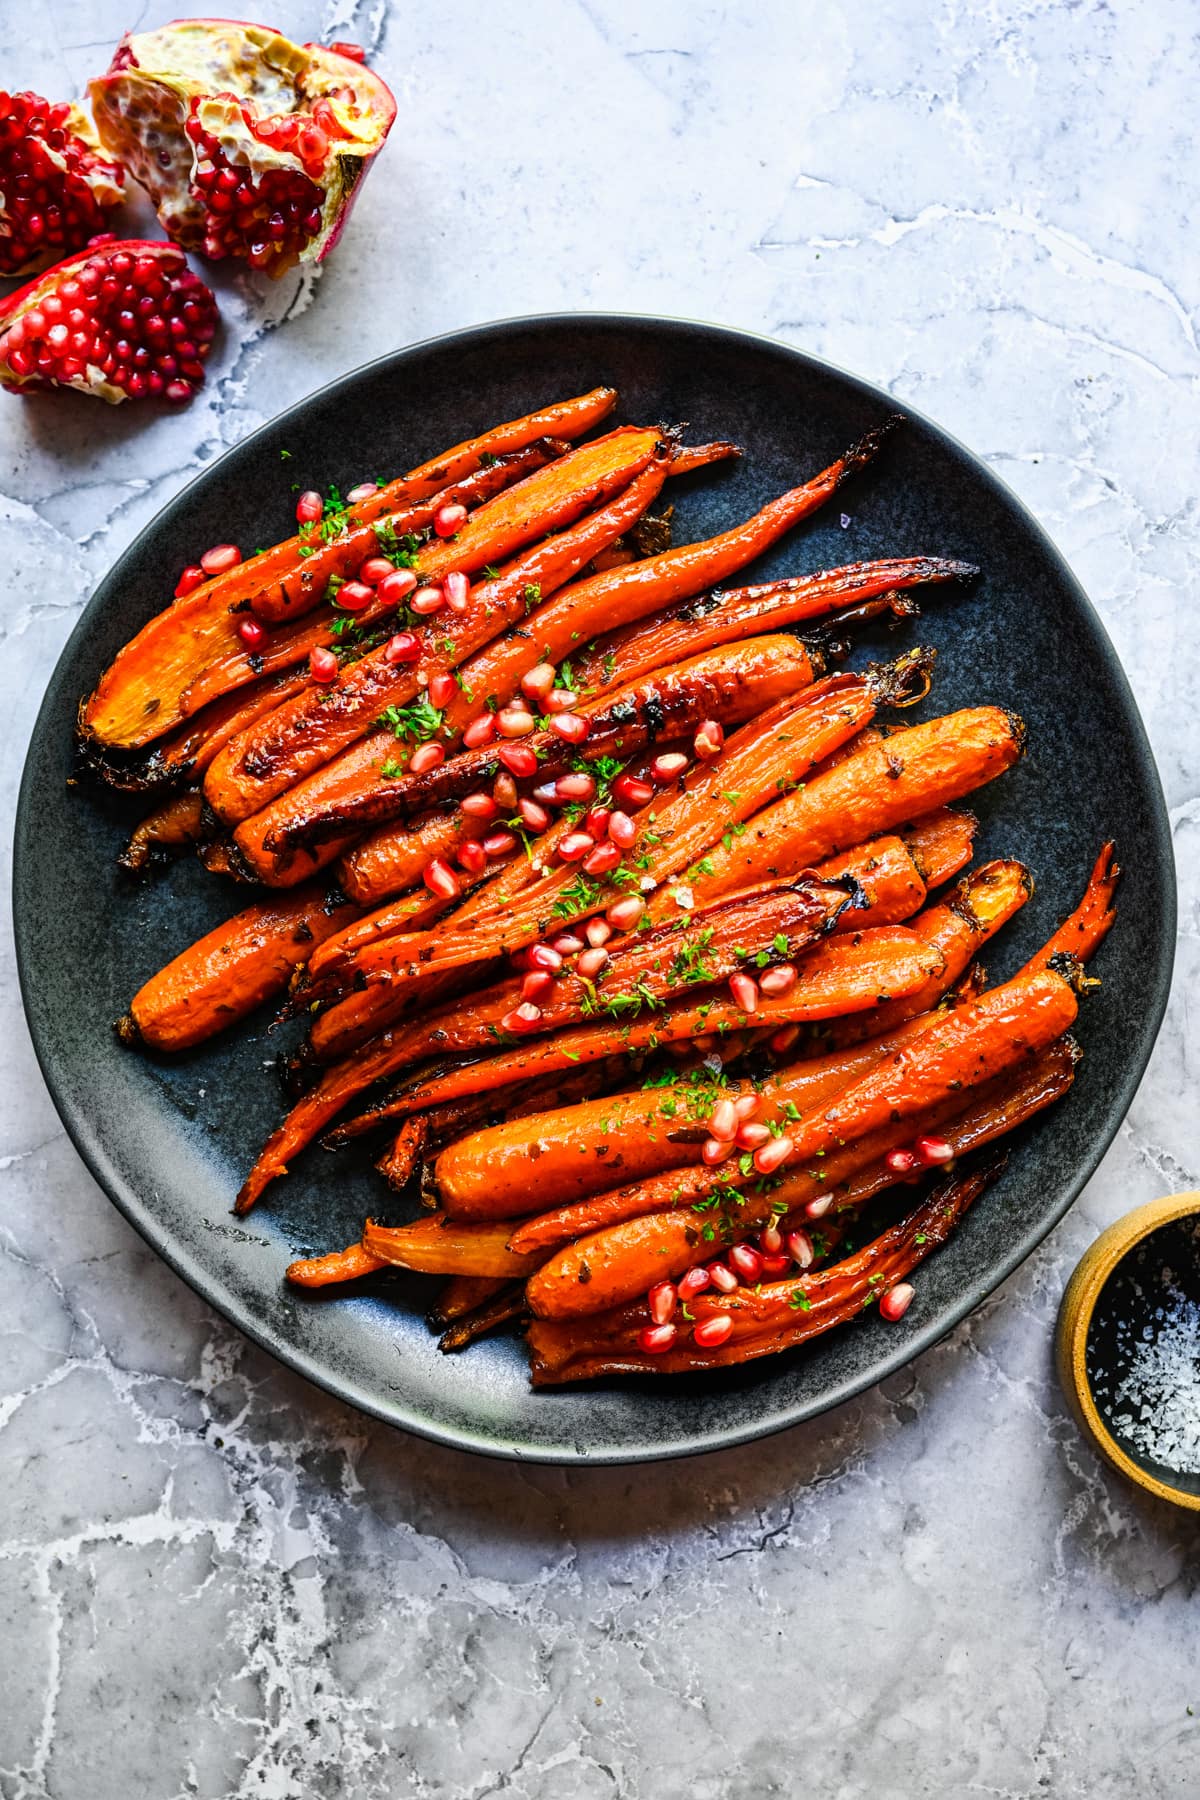 Overhead view of brown sugar honey glazed carrots on a black plate.